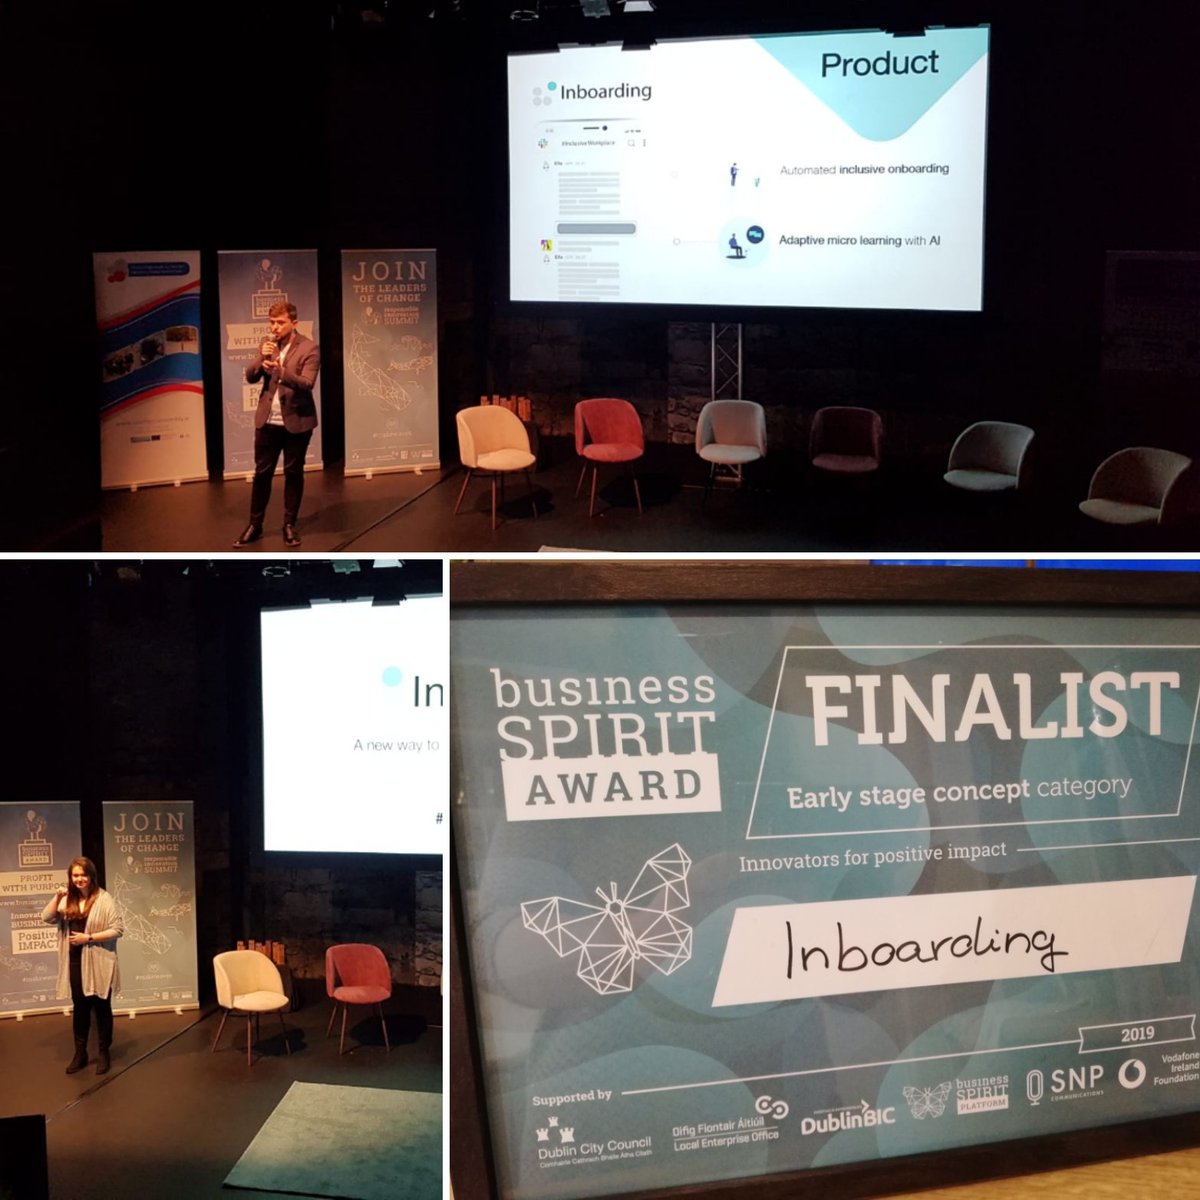 Great event! Thank you for the opportunity to be part of the #SPIRITAward and to present @inboardingco

#inboarding #workertech #isl #libras #signlanguage #deaf #inclusionanddiversity #opportunity #technology